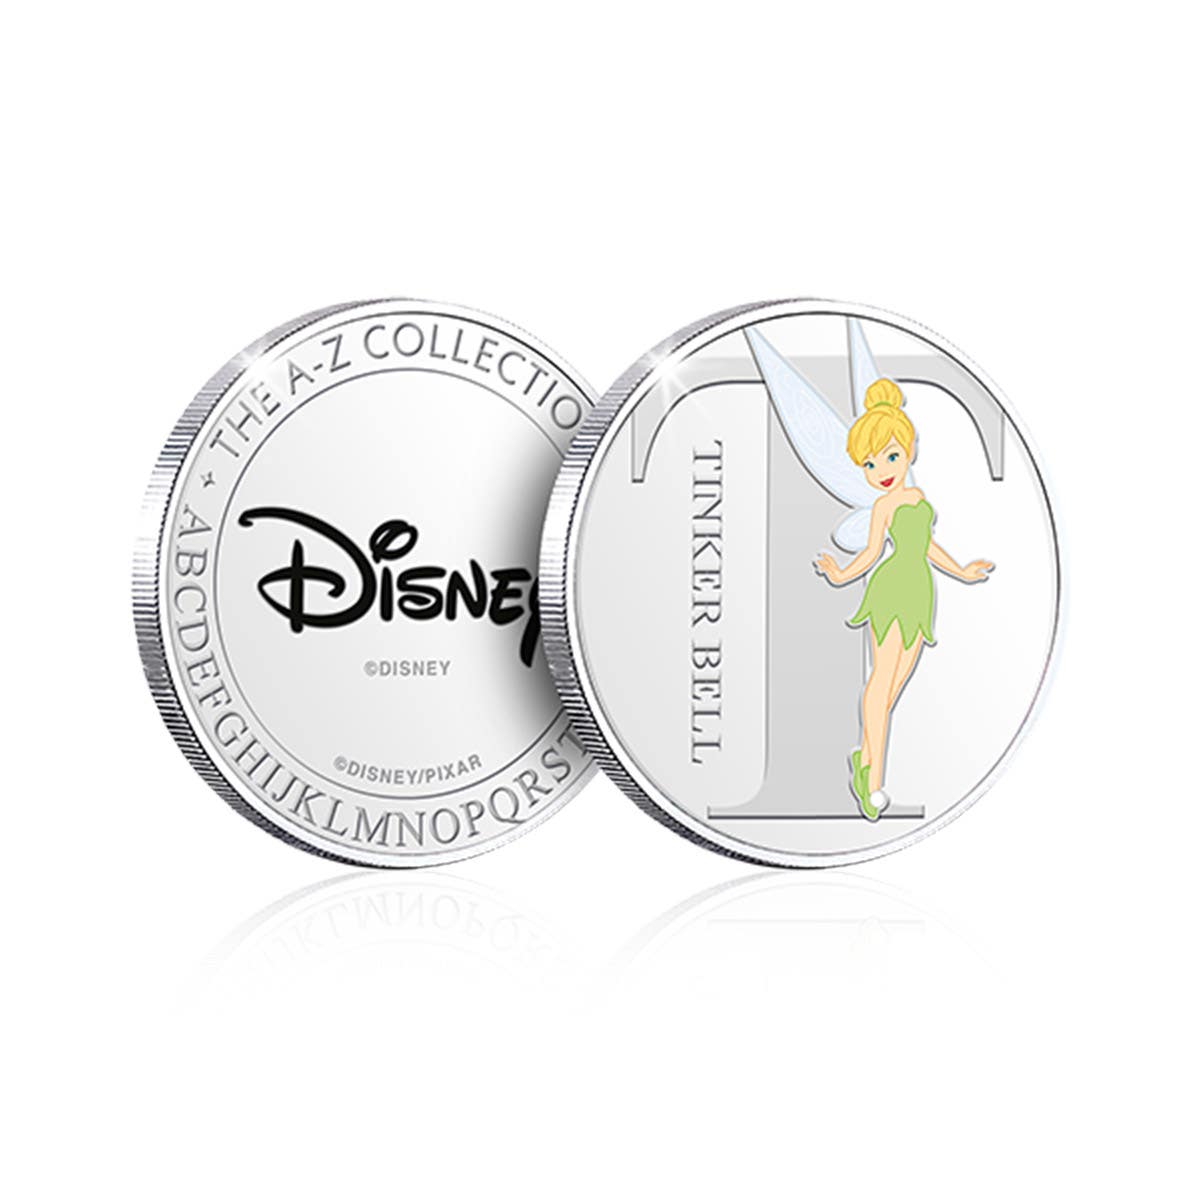 Disney T is for Tinker Bell Silver-Plated Commemorative